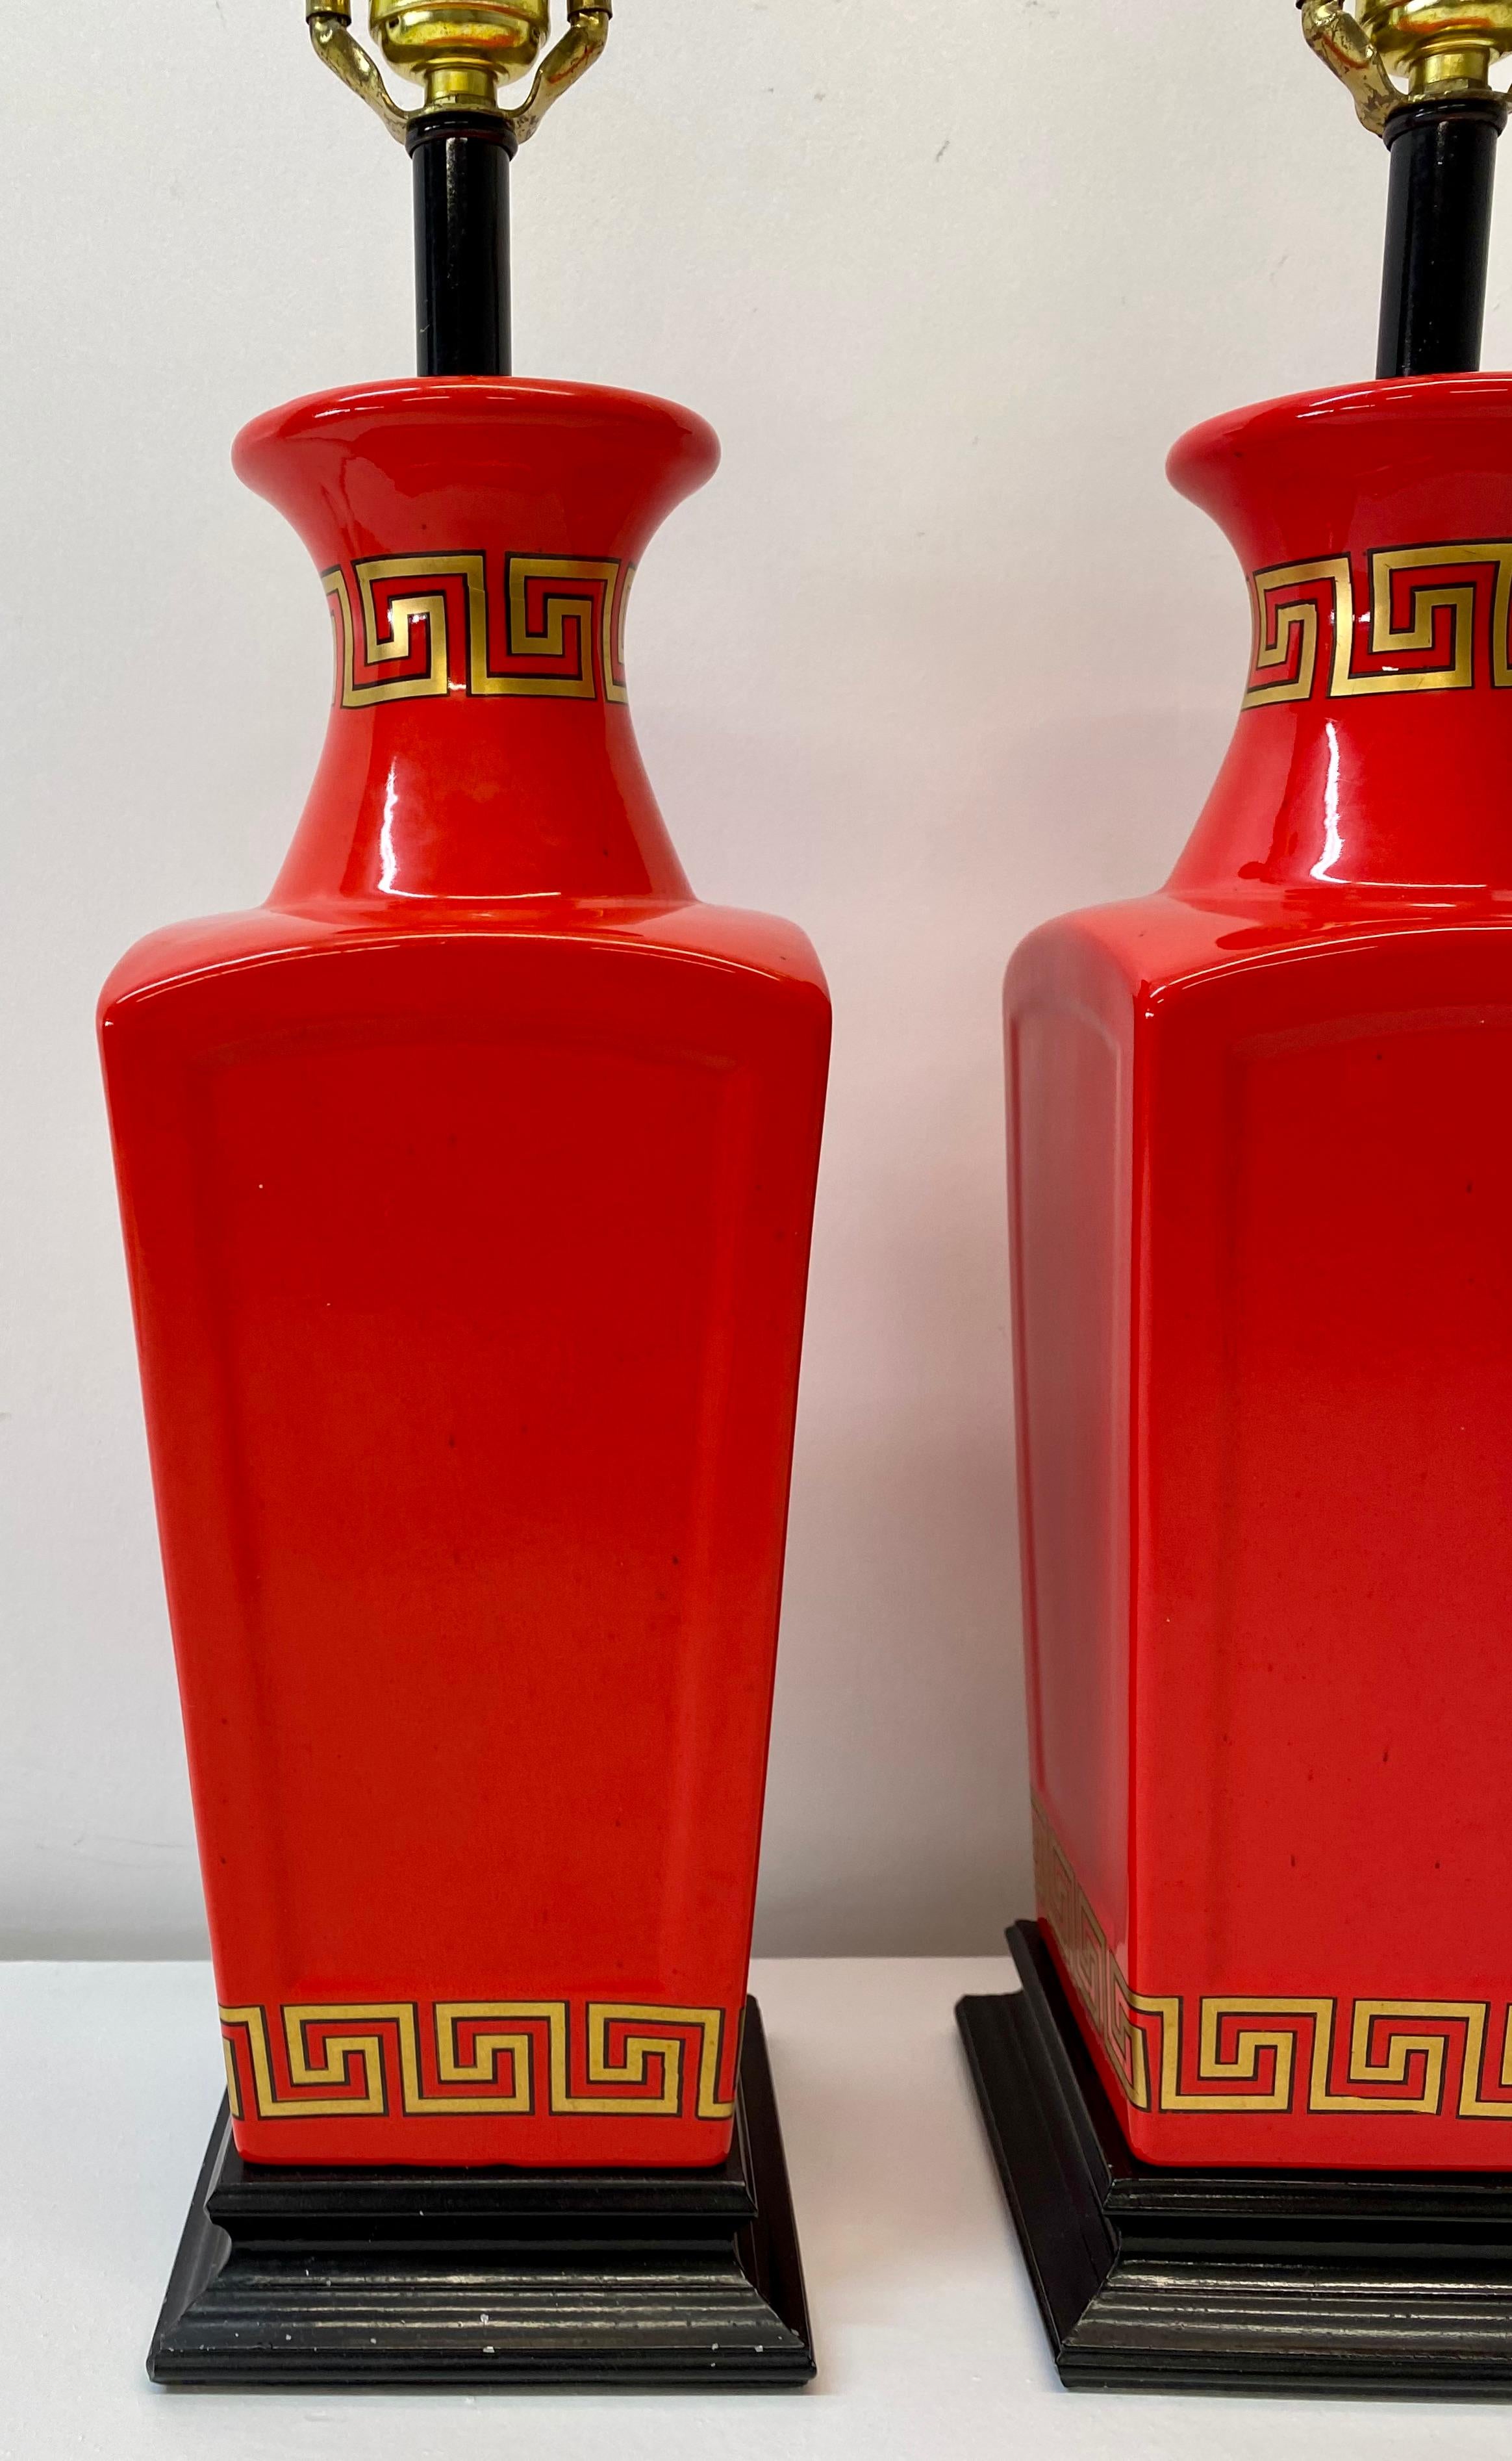 Pair of vintage Asian inspired Chinese red table lamps, circa 1960

Hand painted geometric pattern in gold with black border 

Absolutely gorgeous eye-popping red accented with black and gold

These are some of the most beautiful lamps in our